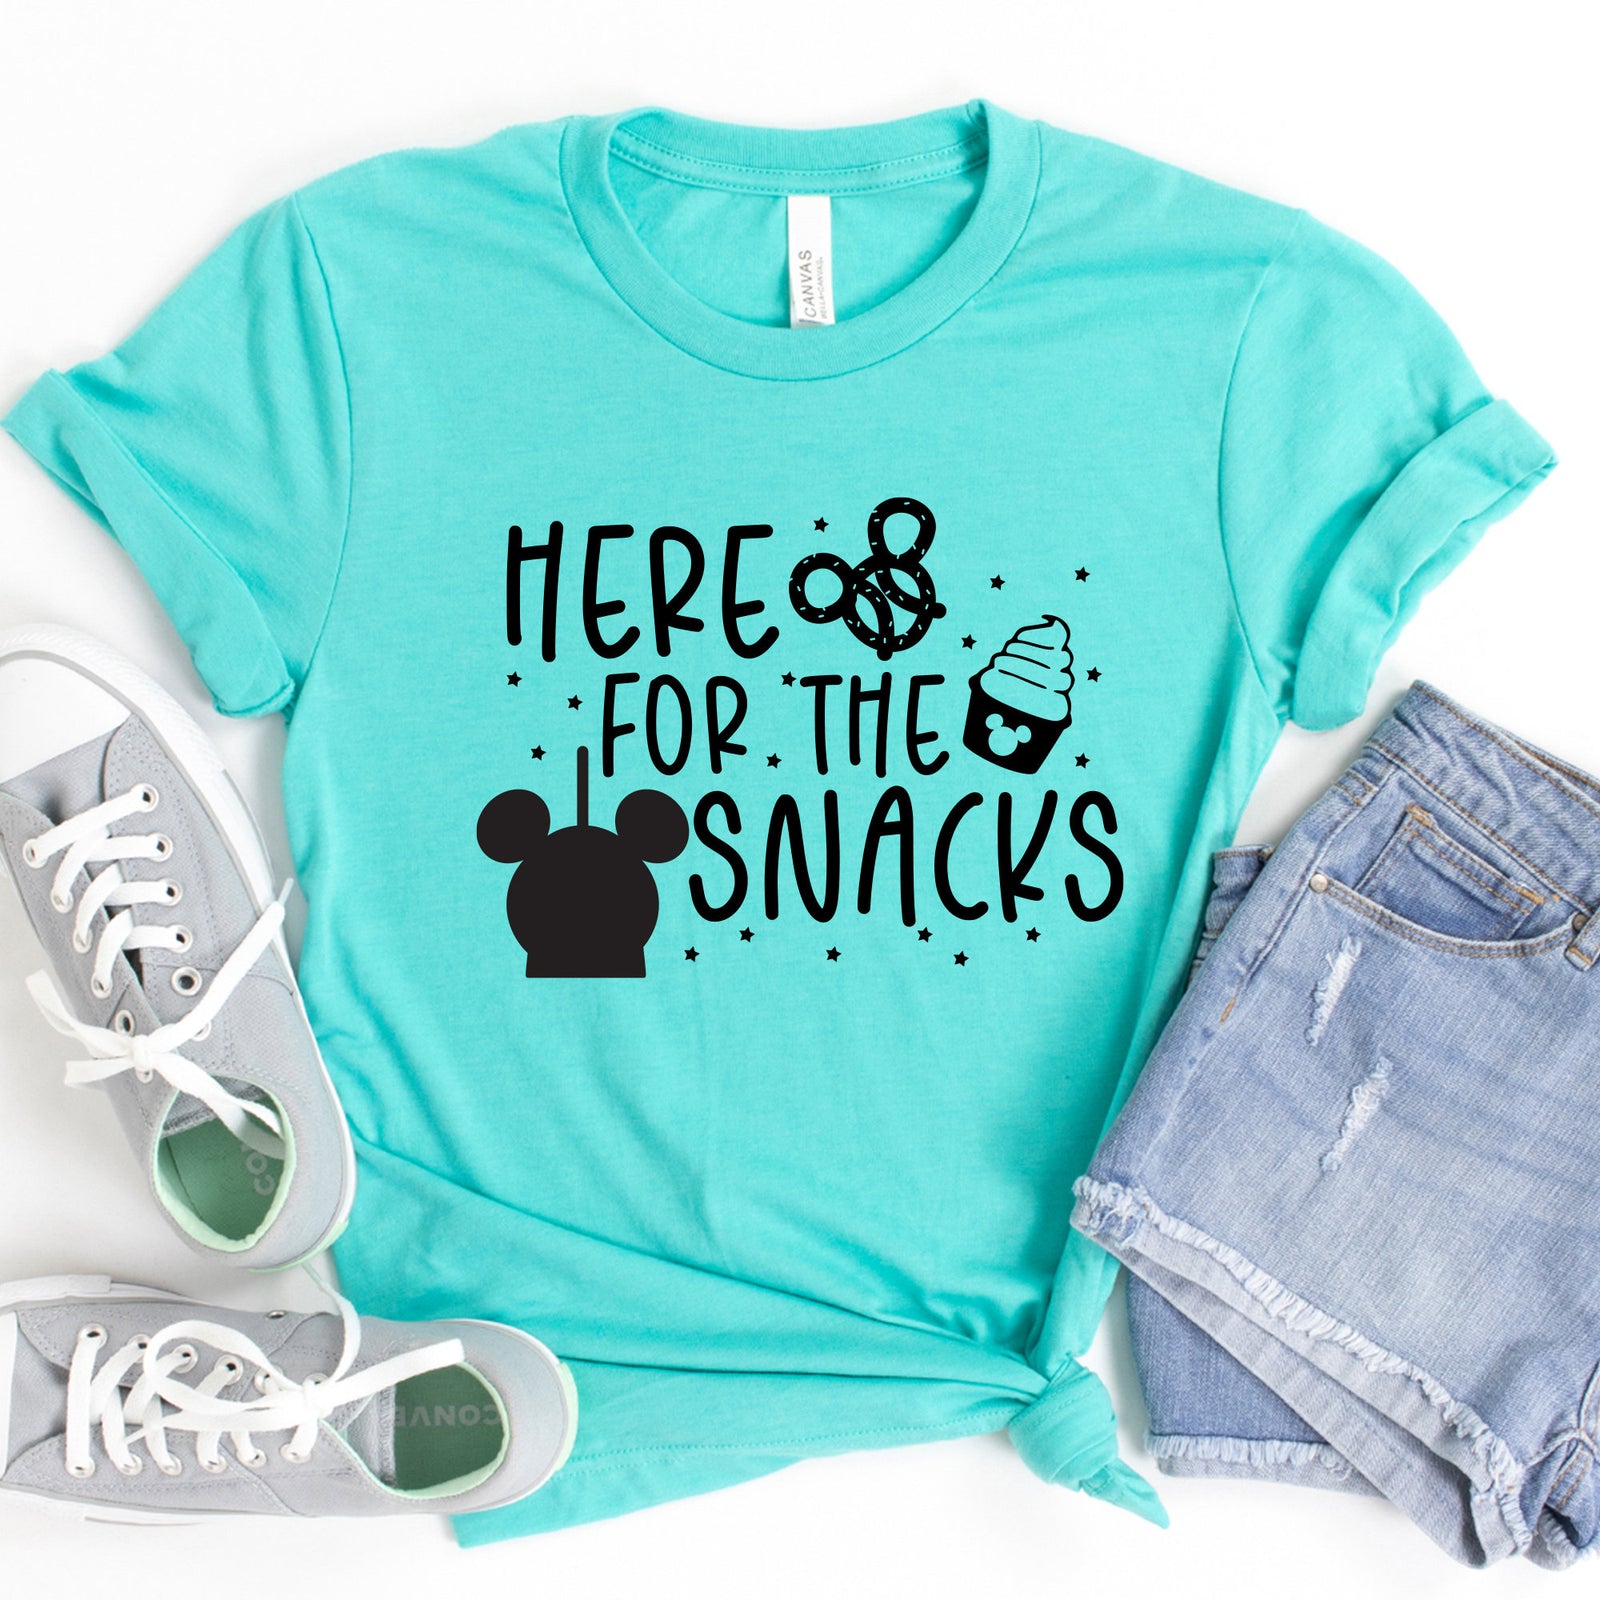 Here for the Snacks Adult T Shirt- Disney Food Lover T Shirt - Dole Whip T Shirt - Pretzel - Mickey Ice Cream